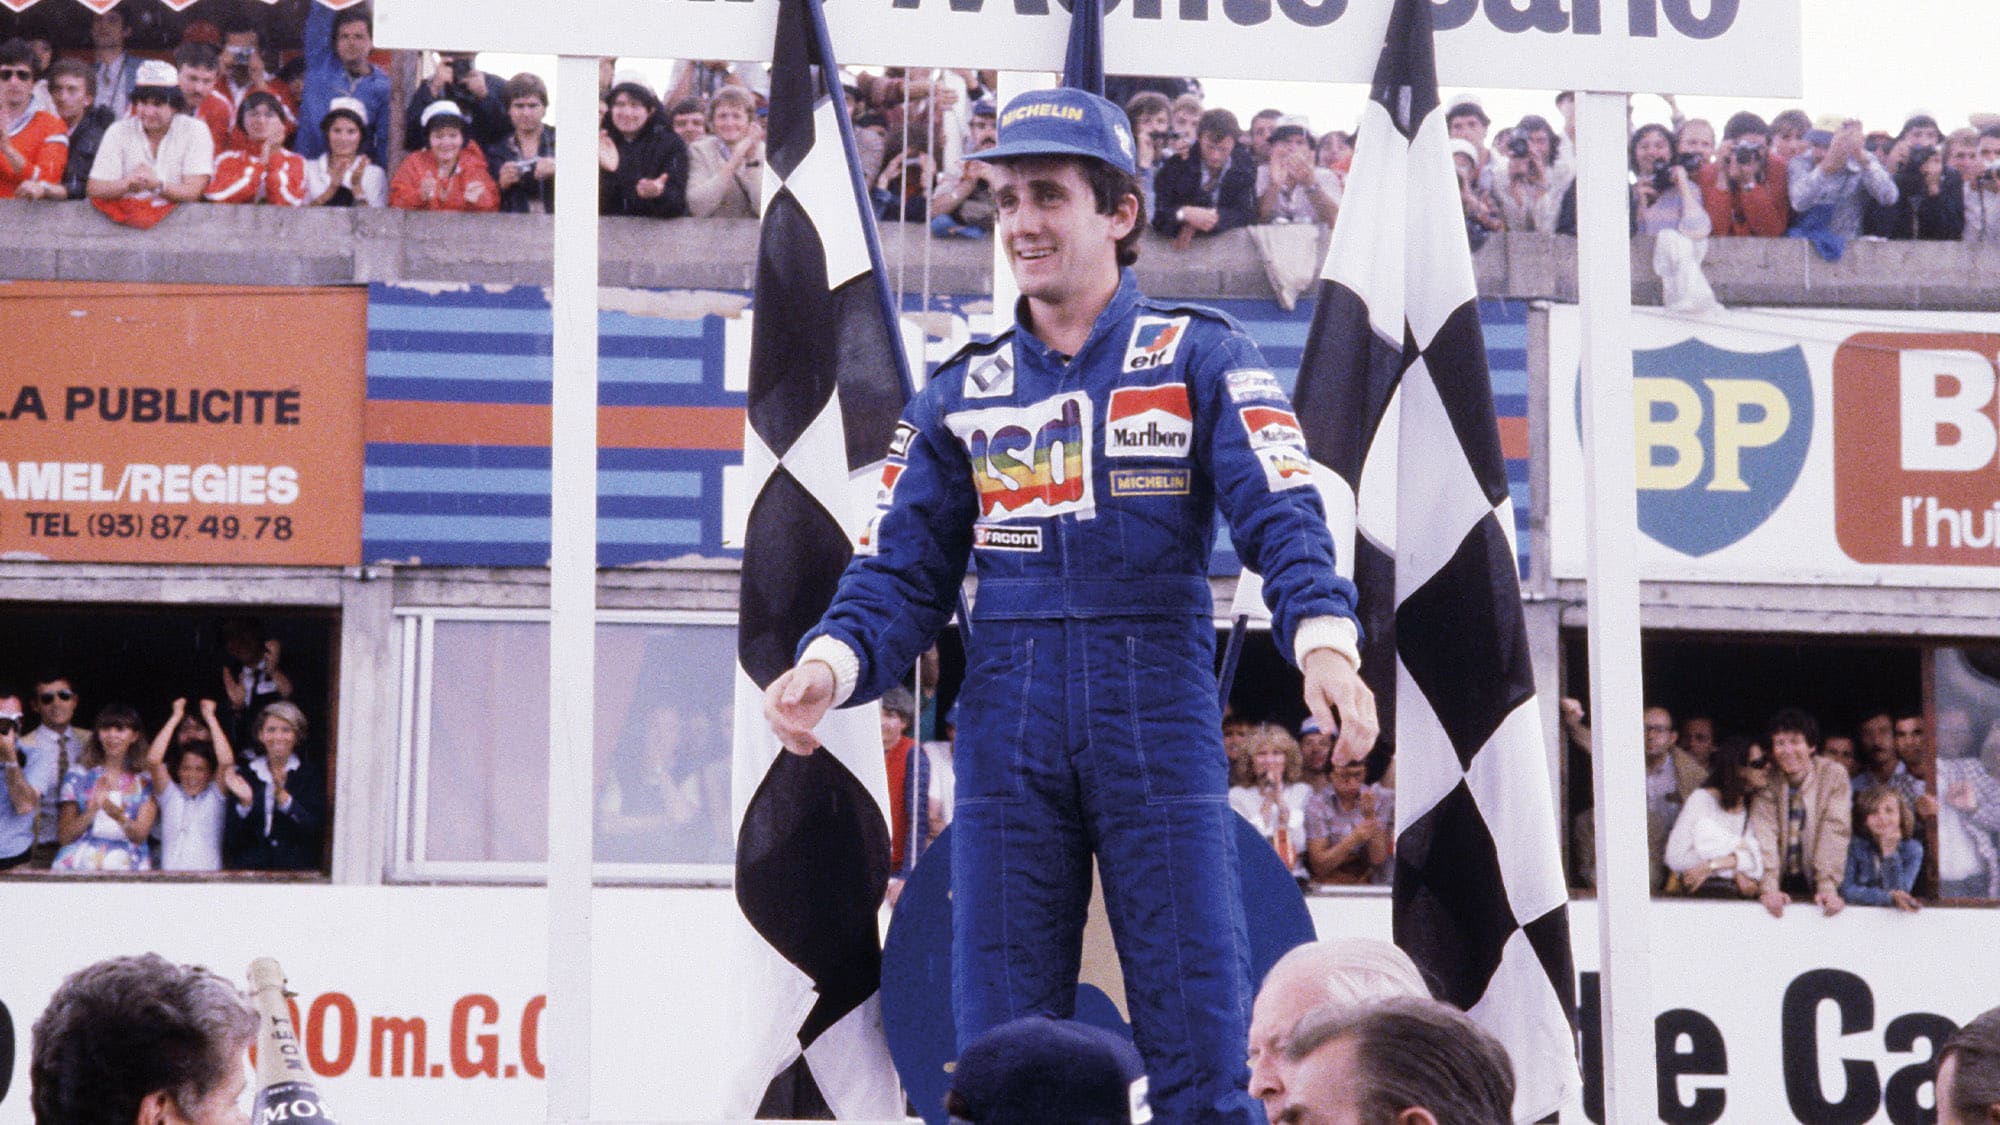 Alain Prost celebrates winning the 1981 French Grand Prix at Paul Ricard for Renault